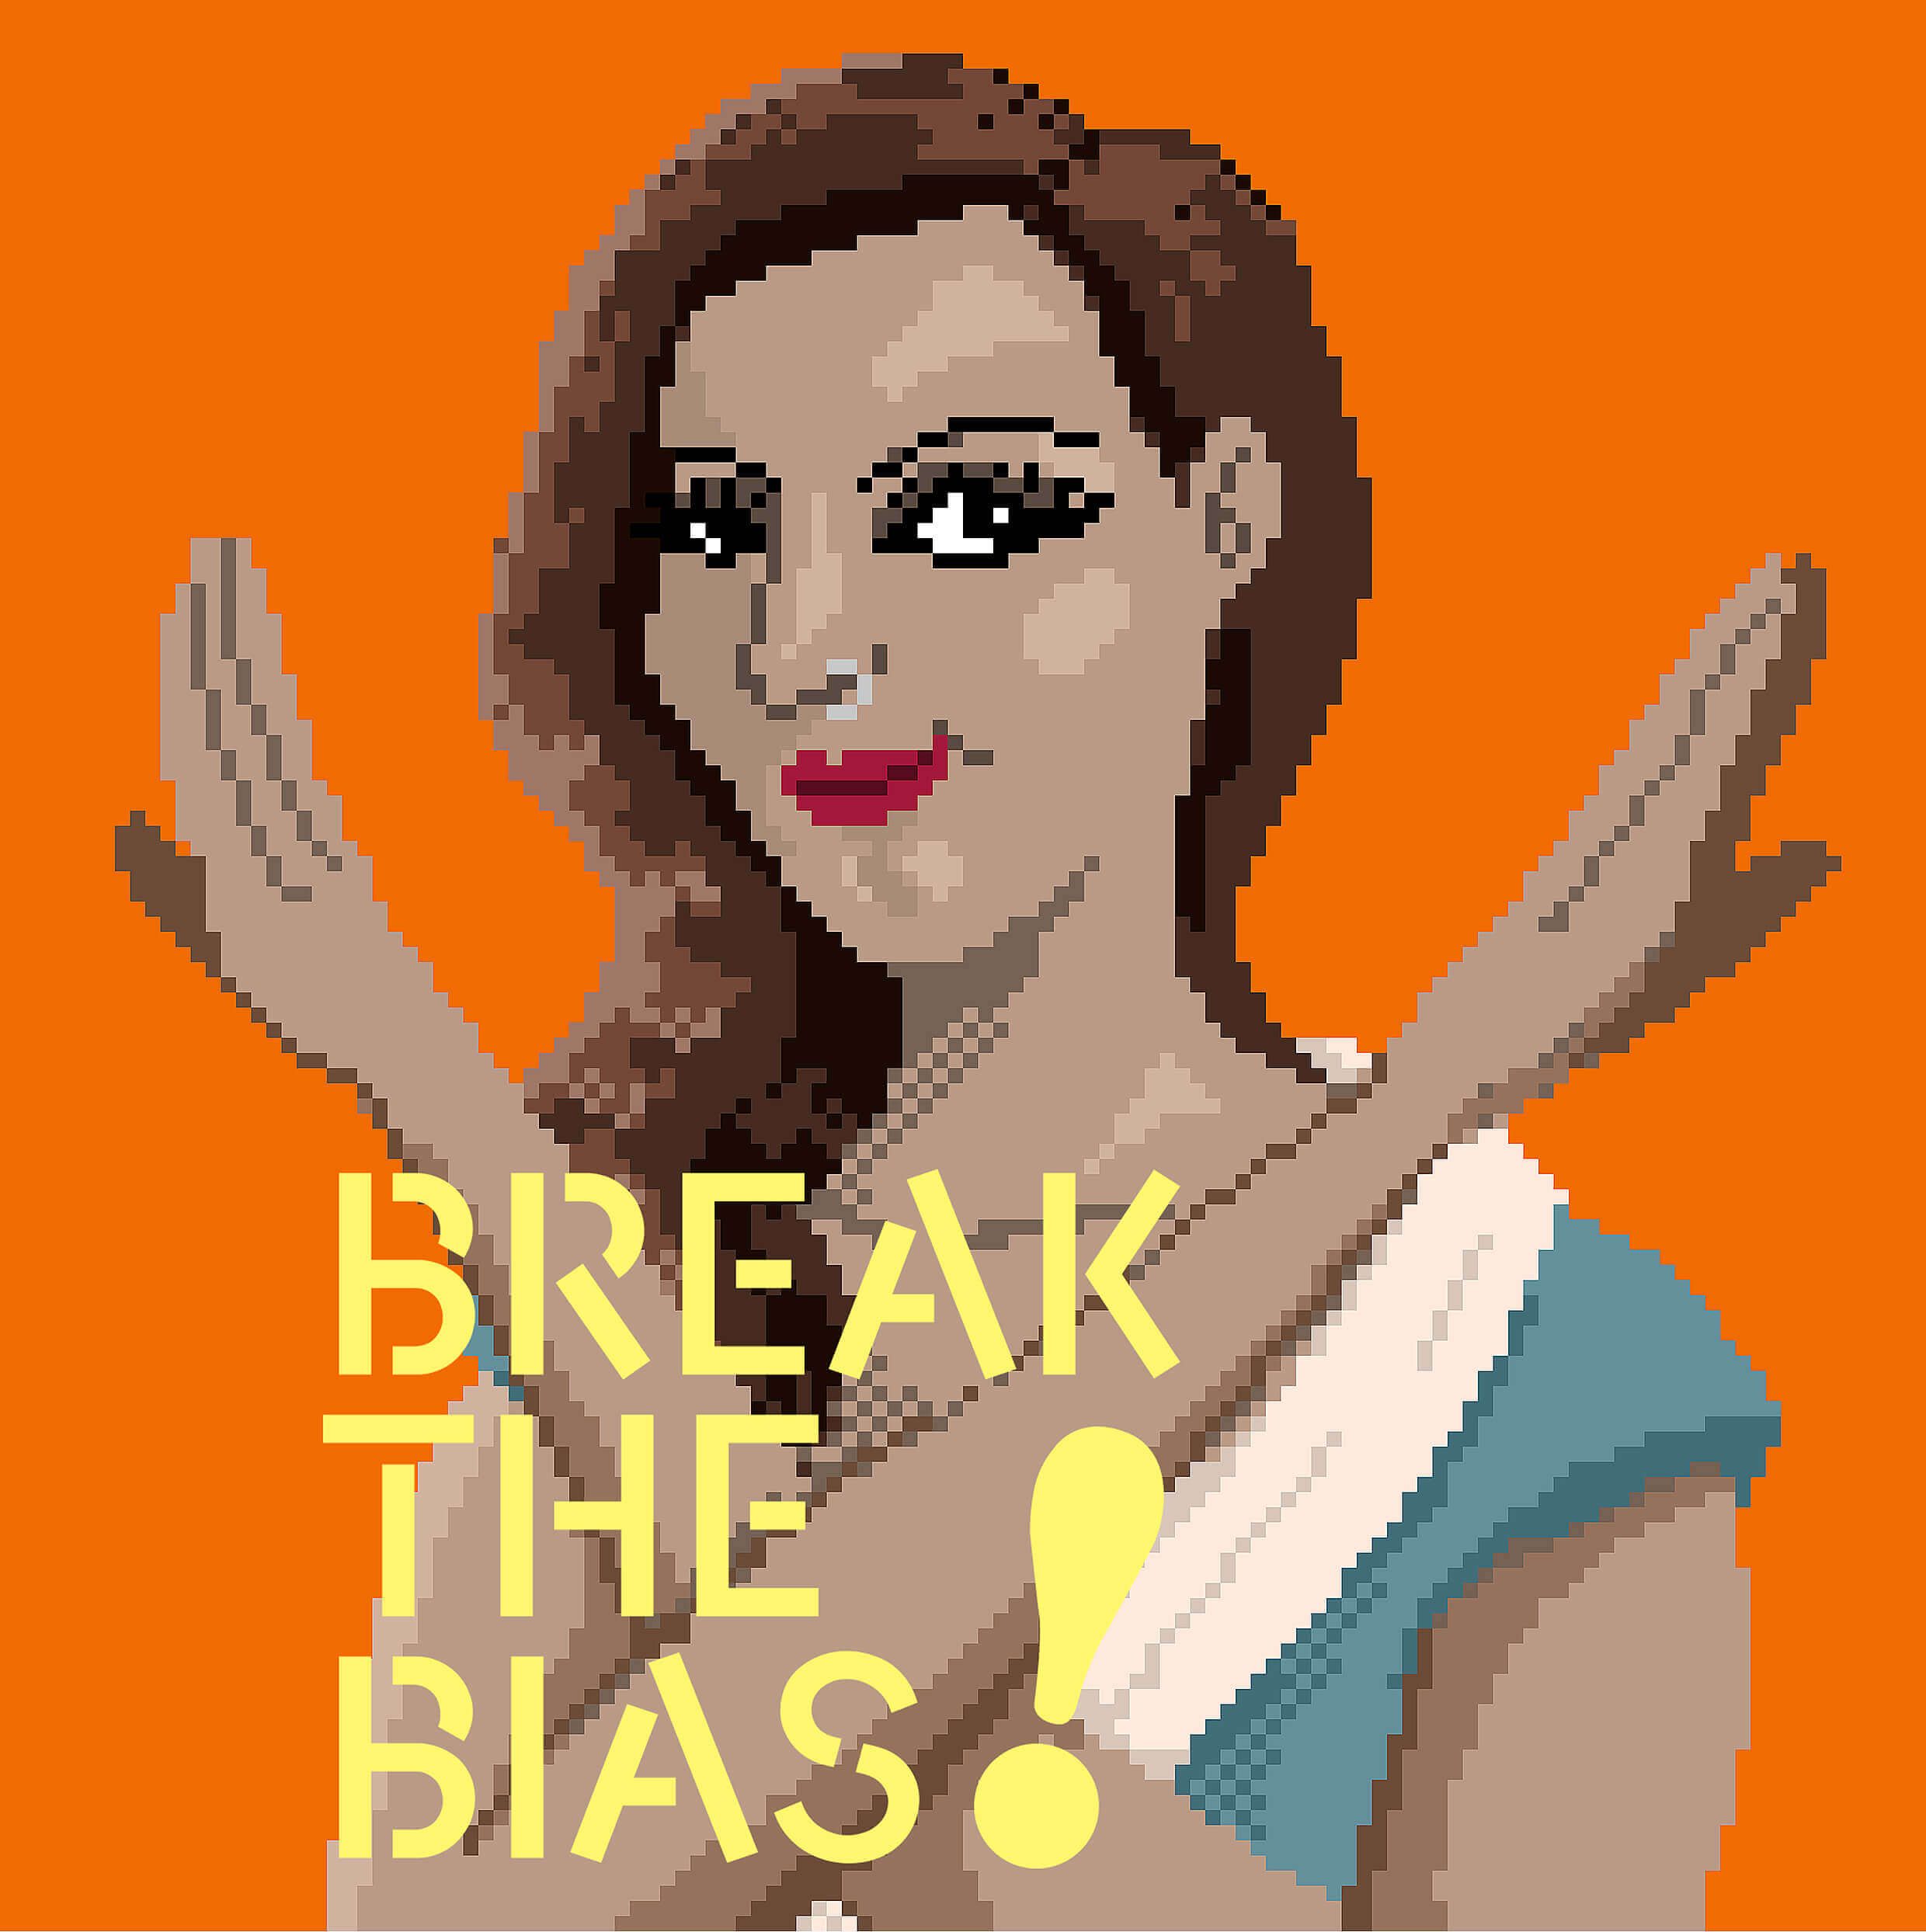 An Indian trans woman crosses her arms in front of her. The image is brightly colored and created in a pixelated style.